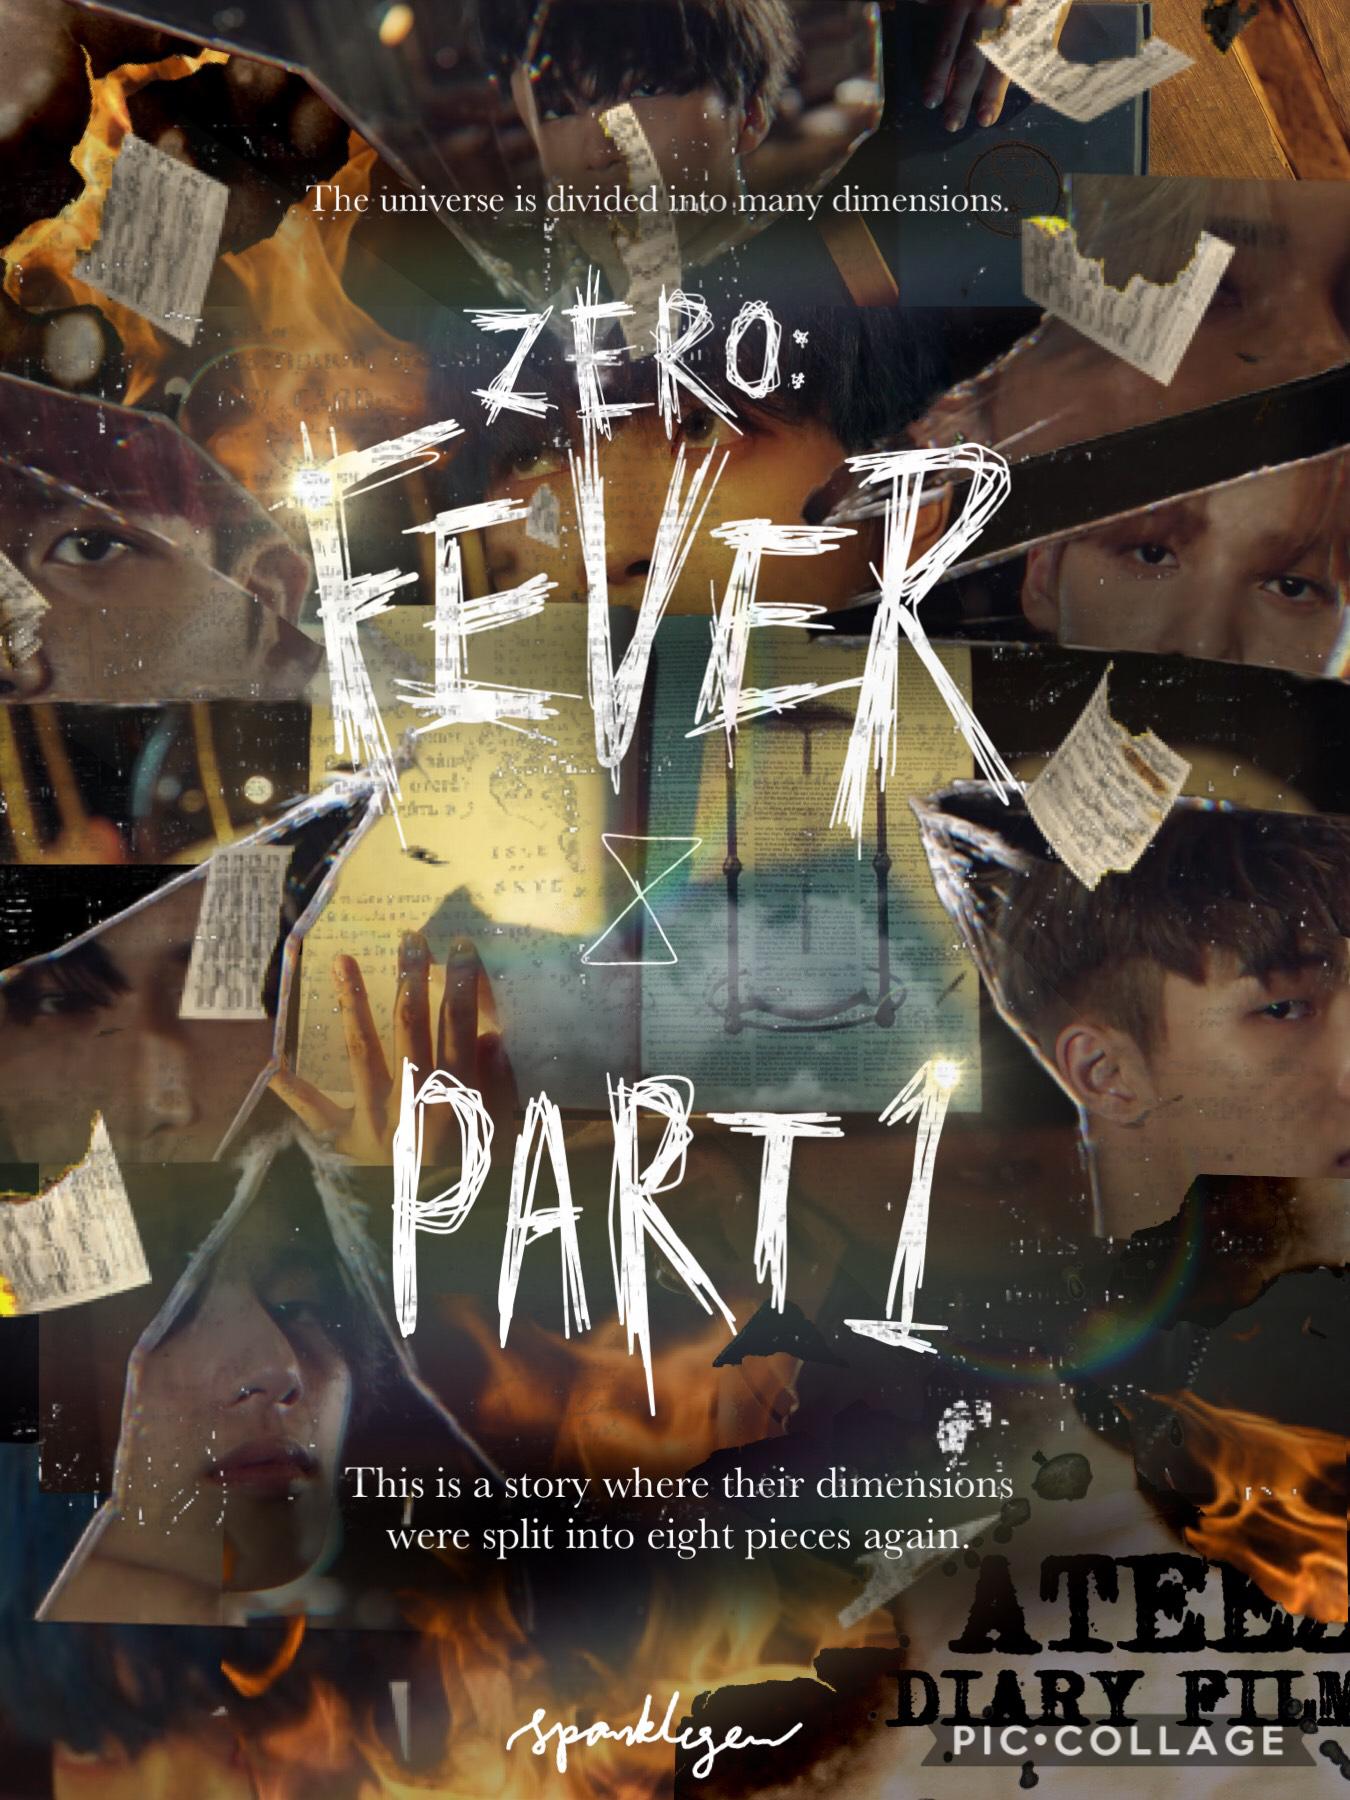 [1/10] 🖤NEW THEME: ATEEZ’s “ZERO: FEVER PART 1: Diary Film” 🖤
I haven’t done a theme since literally dec 2017 so i rlly hope i dont regret doing this to myself and i hope this doesn’t flop🤡. Anyways enjoy the story (but it’s gonna be  confusing haha...)